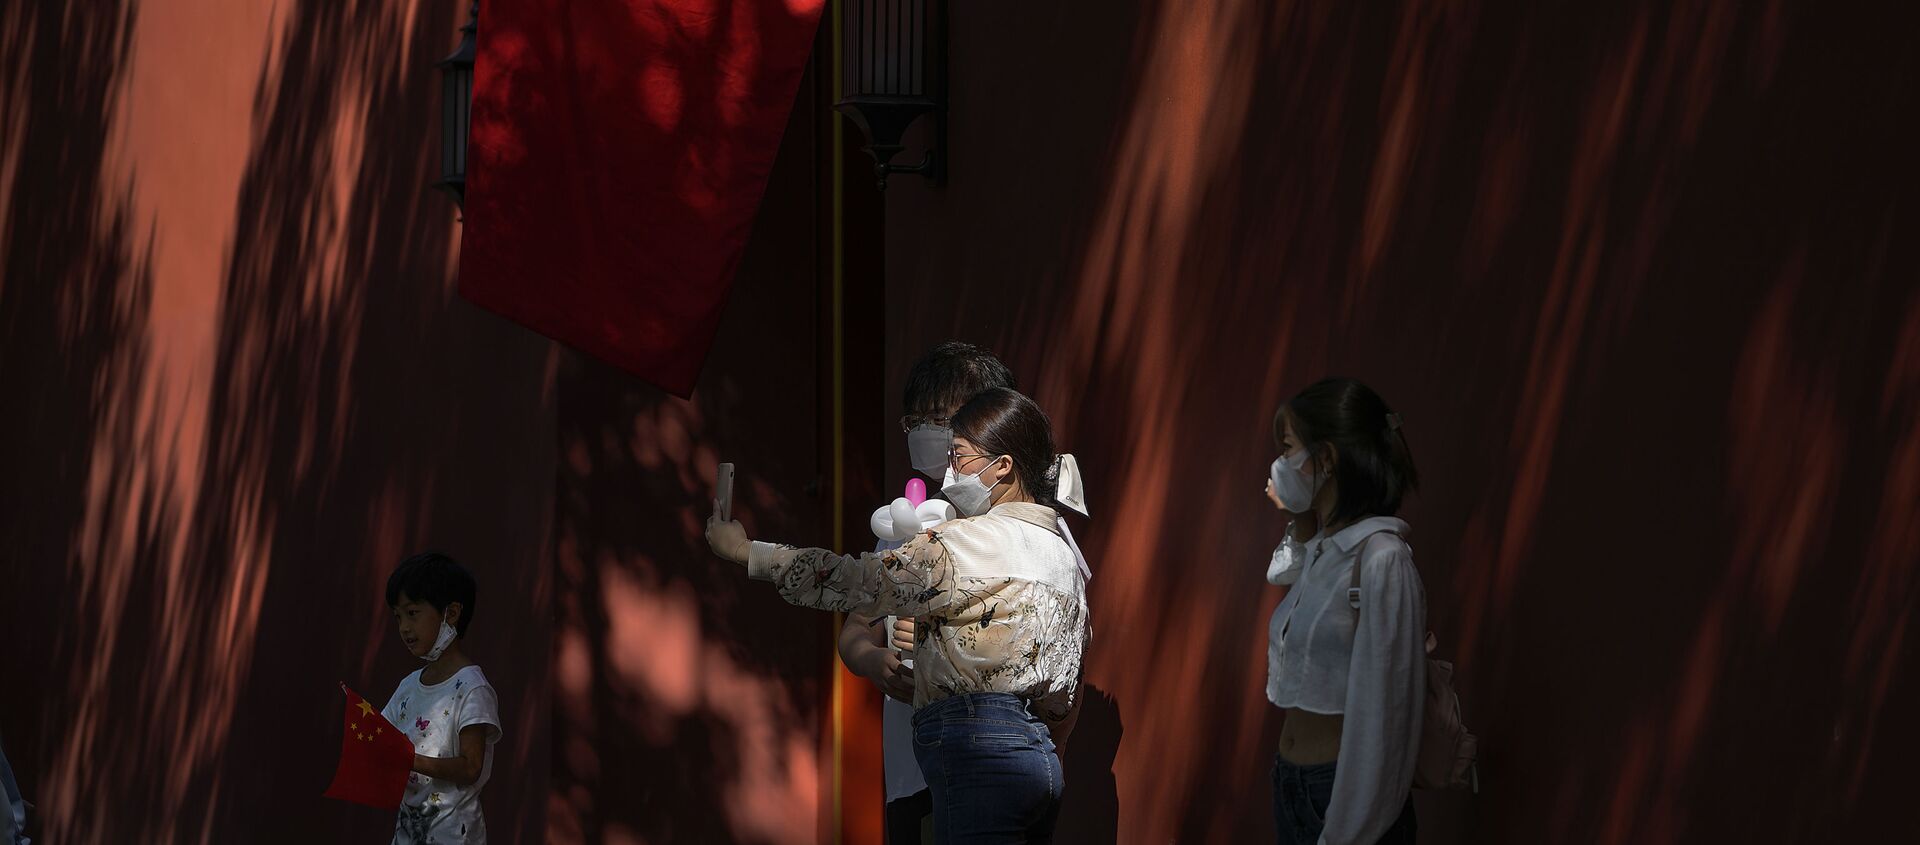 A couple wearing face masks to help protect from the coronavirus pose for a selfie near a national flag on a wall cast with shadows from trees on National Day in Beijing, Friday, Oct. 1, 2021. Hundreds of thousands domestic tourists flock to the square to celebrate the 72nd National Day of the People's Republic of China over a week-long holiday. (AP Photo/Andy Wong) - 俄羅斯衛星通訊社, 1920, 02.10.2021